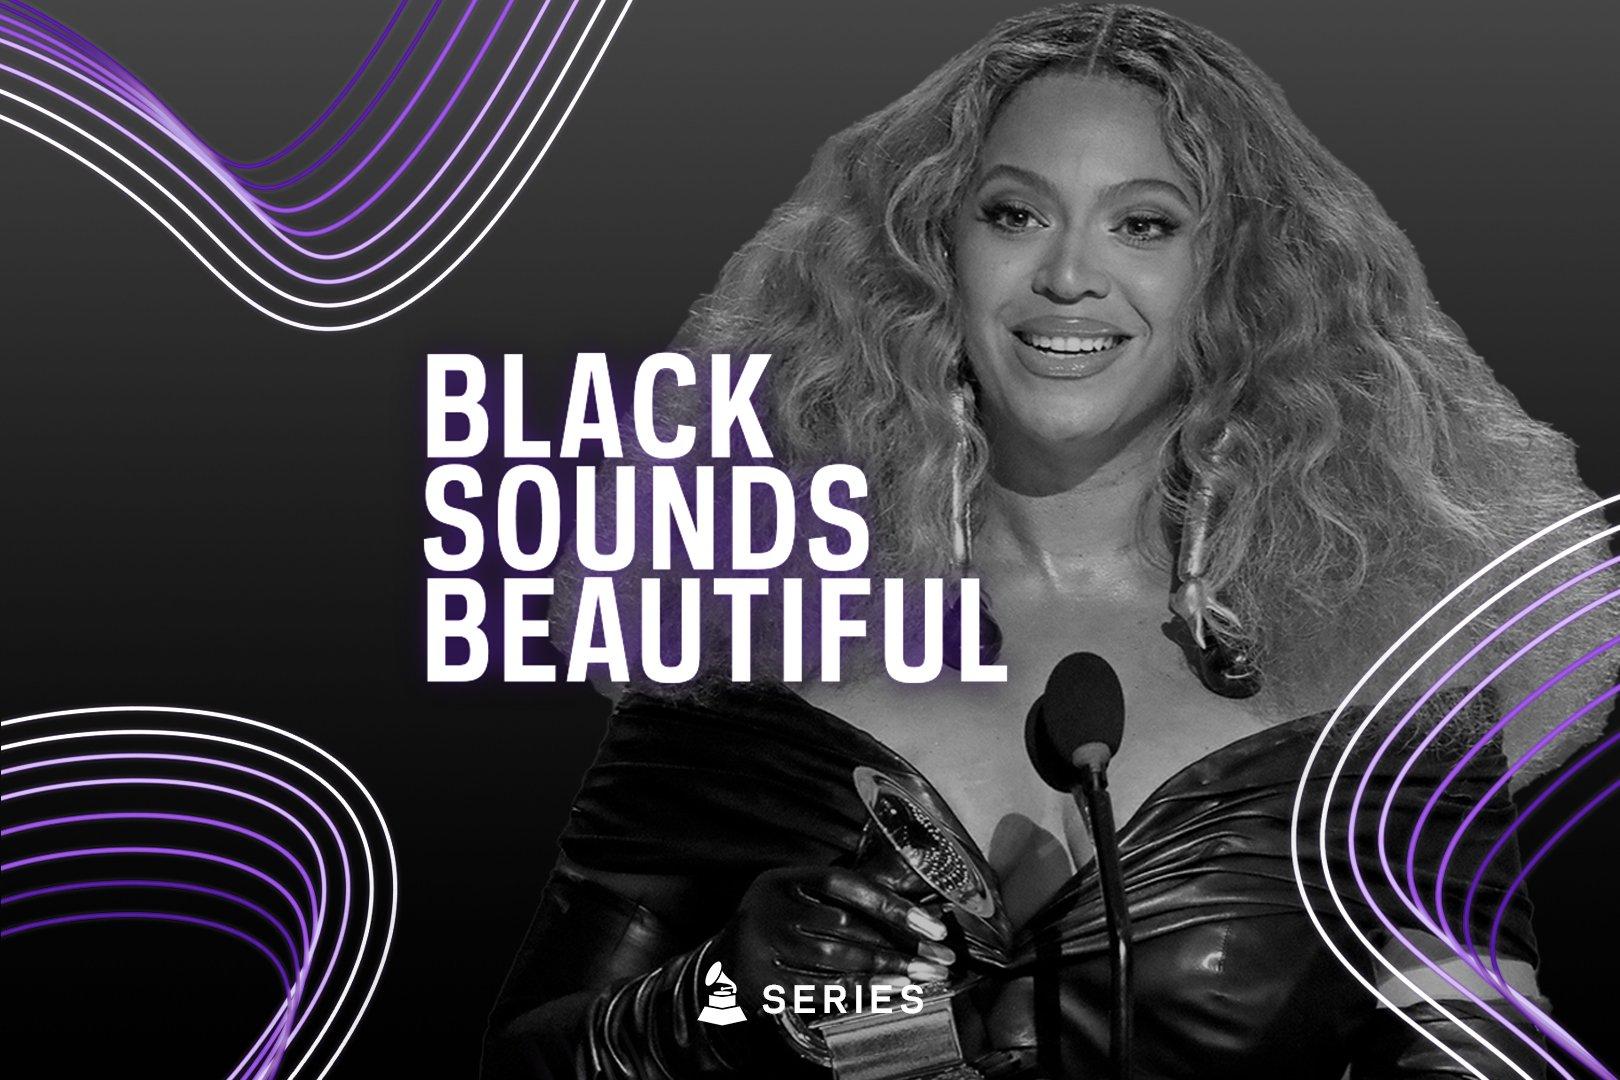 Artwork for Black Sounds Beautiful Collection